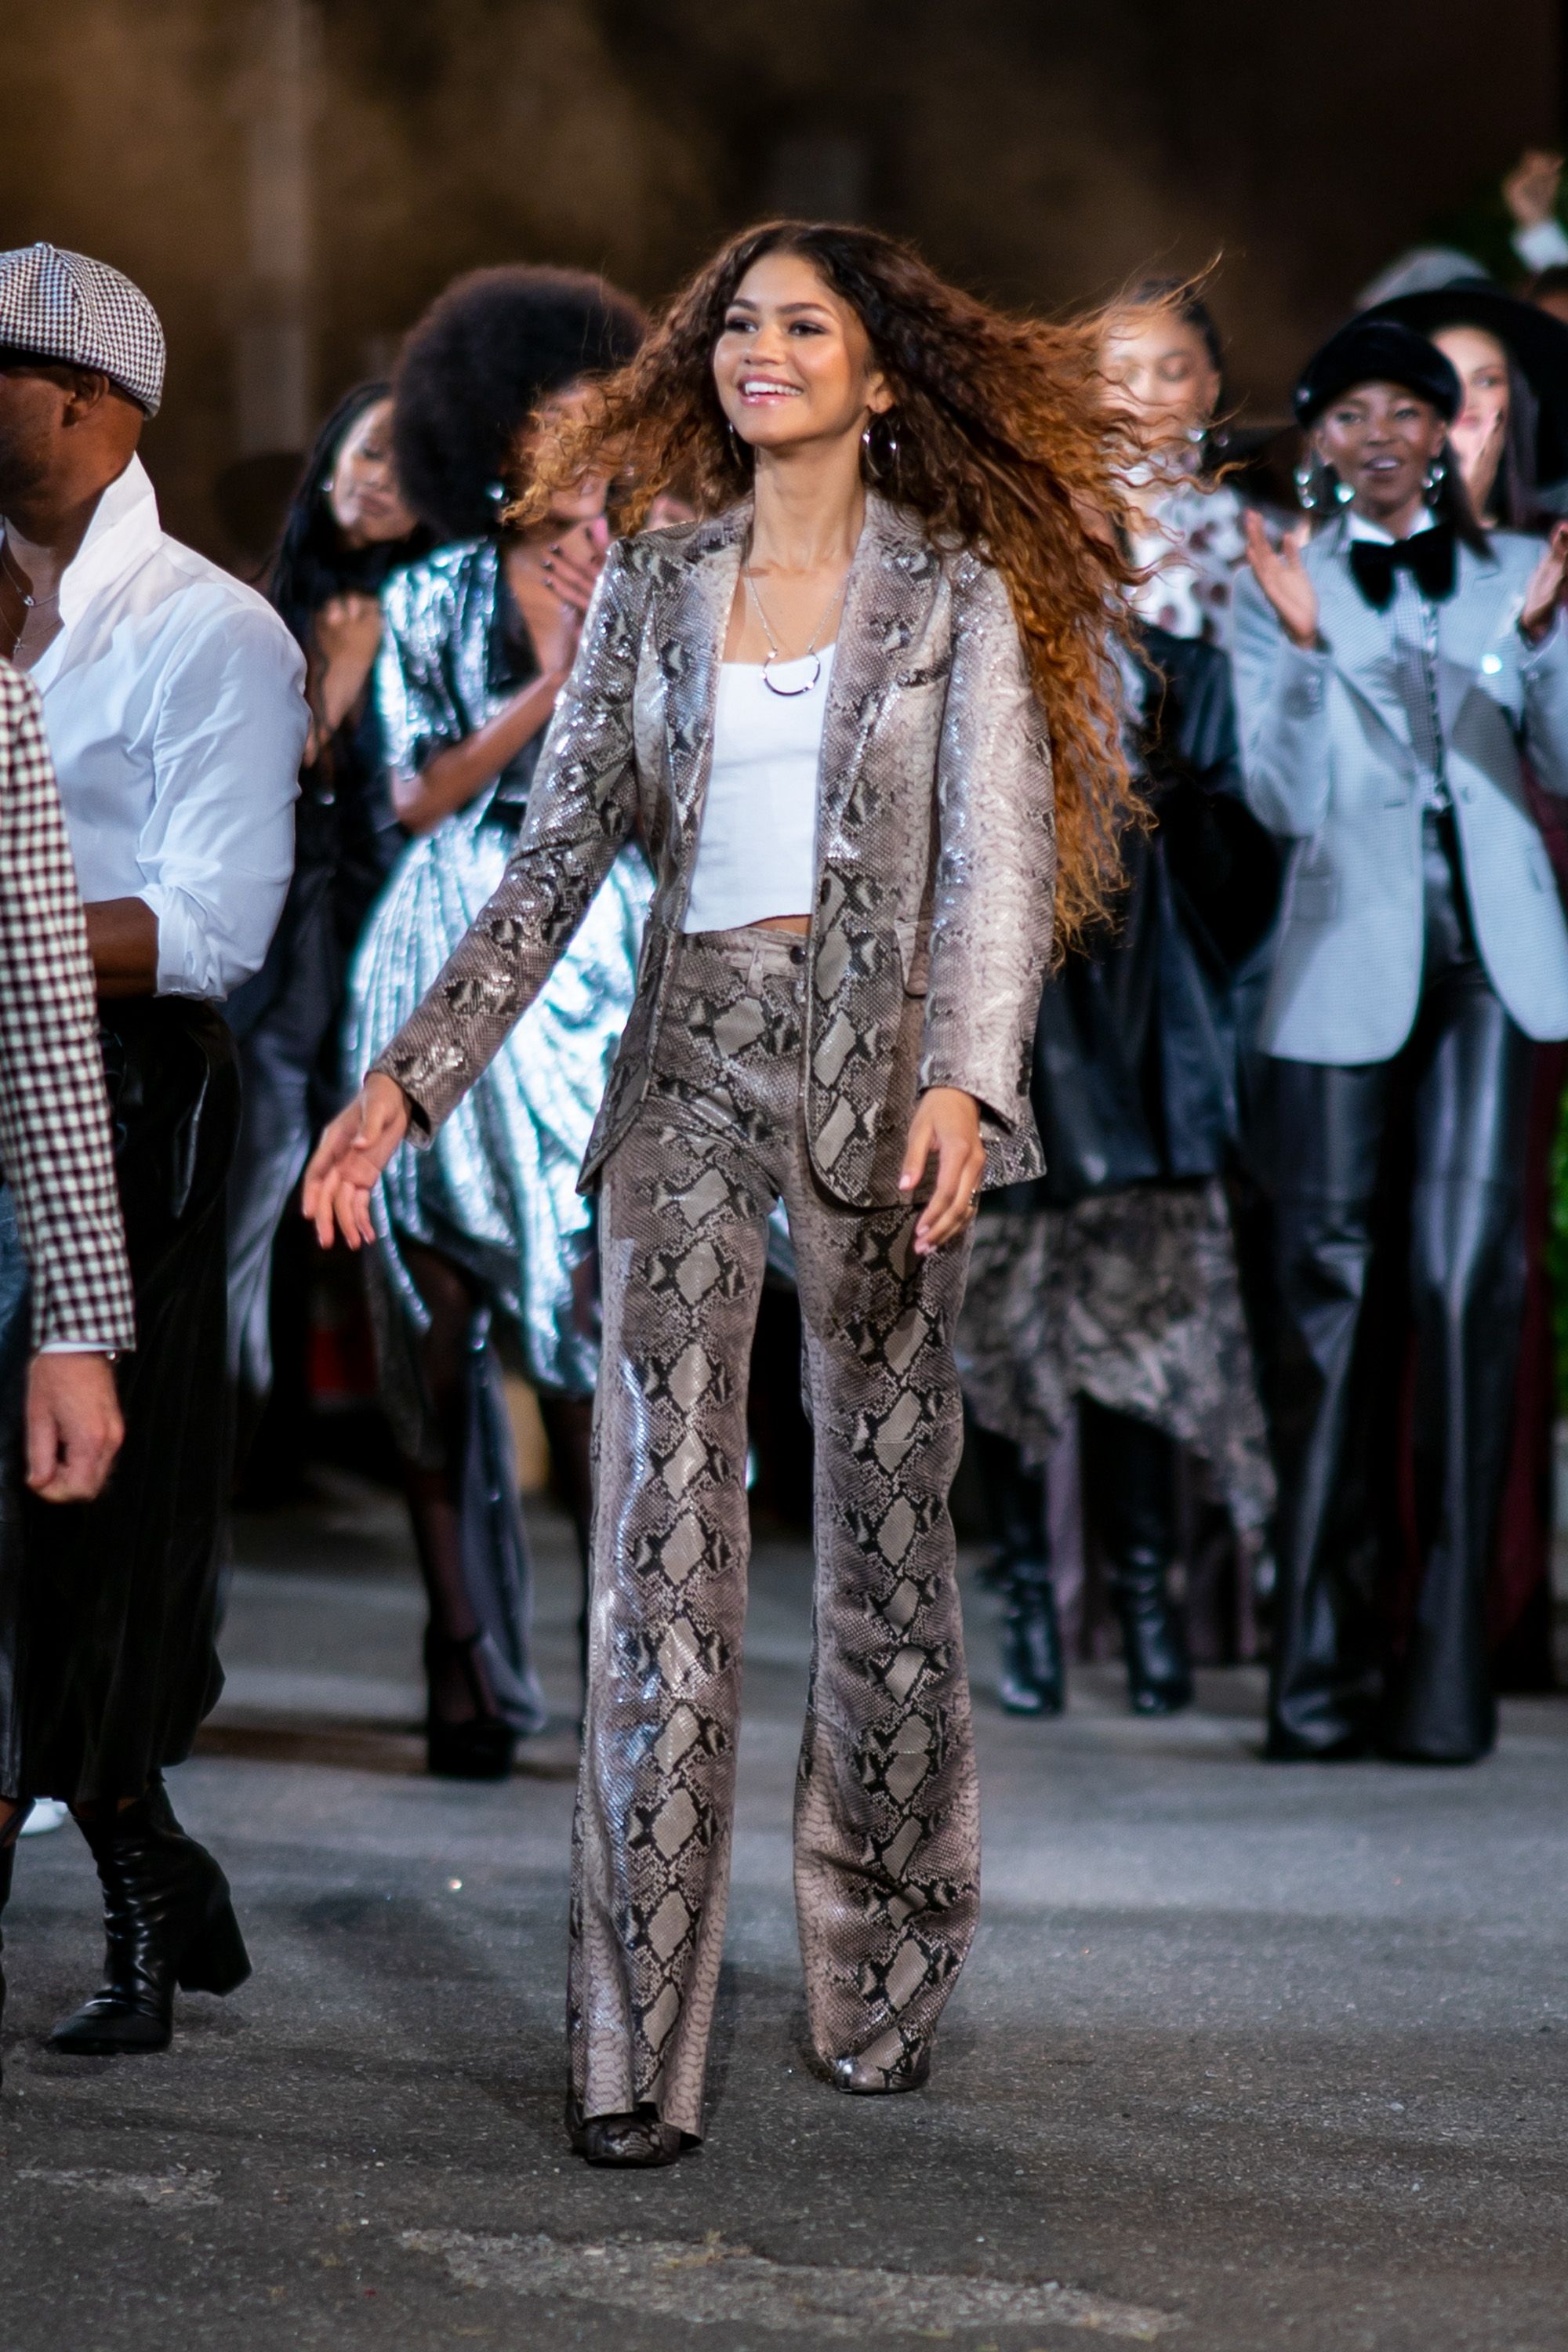 Zendaya and Tommy Hilfiger Head to 